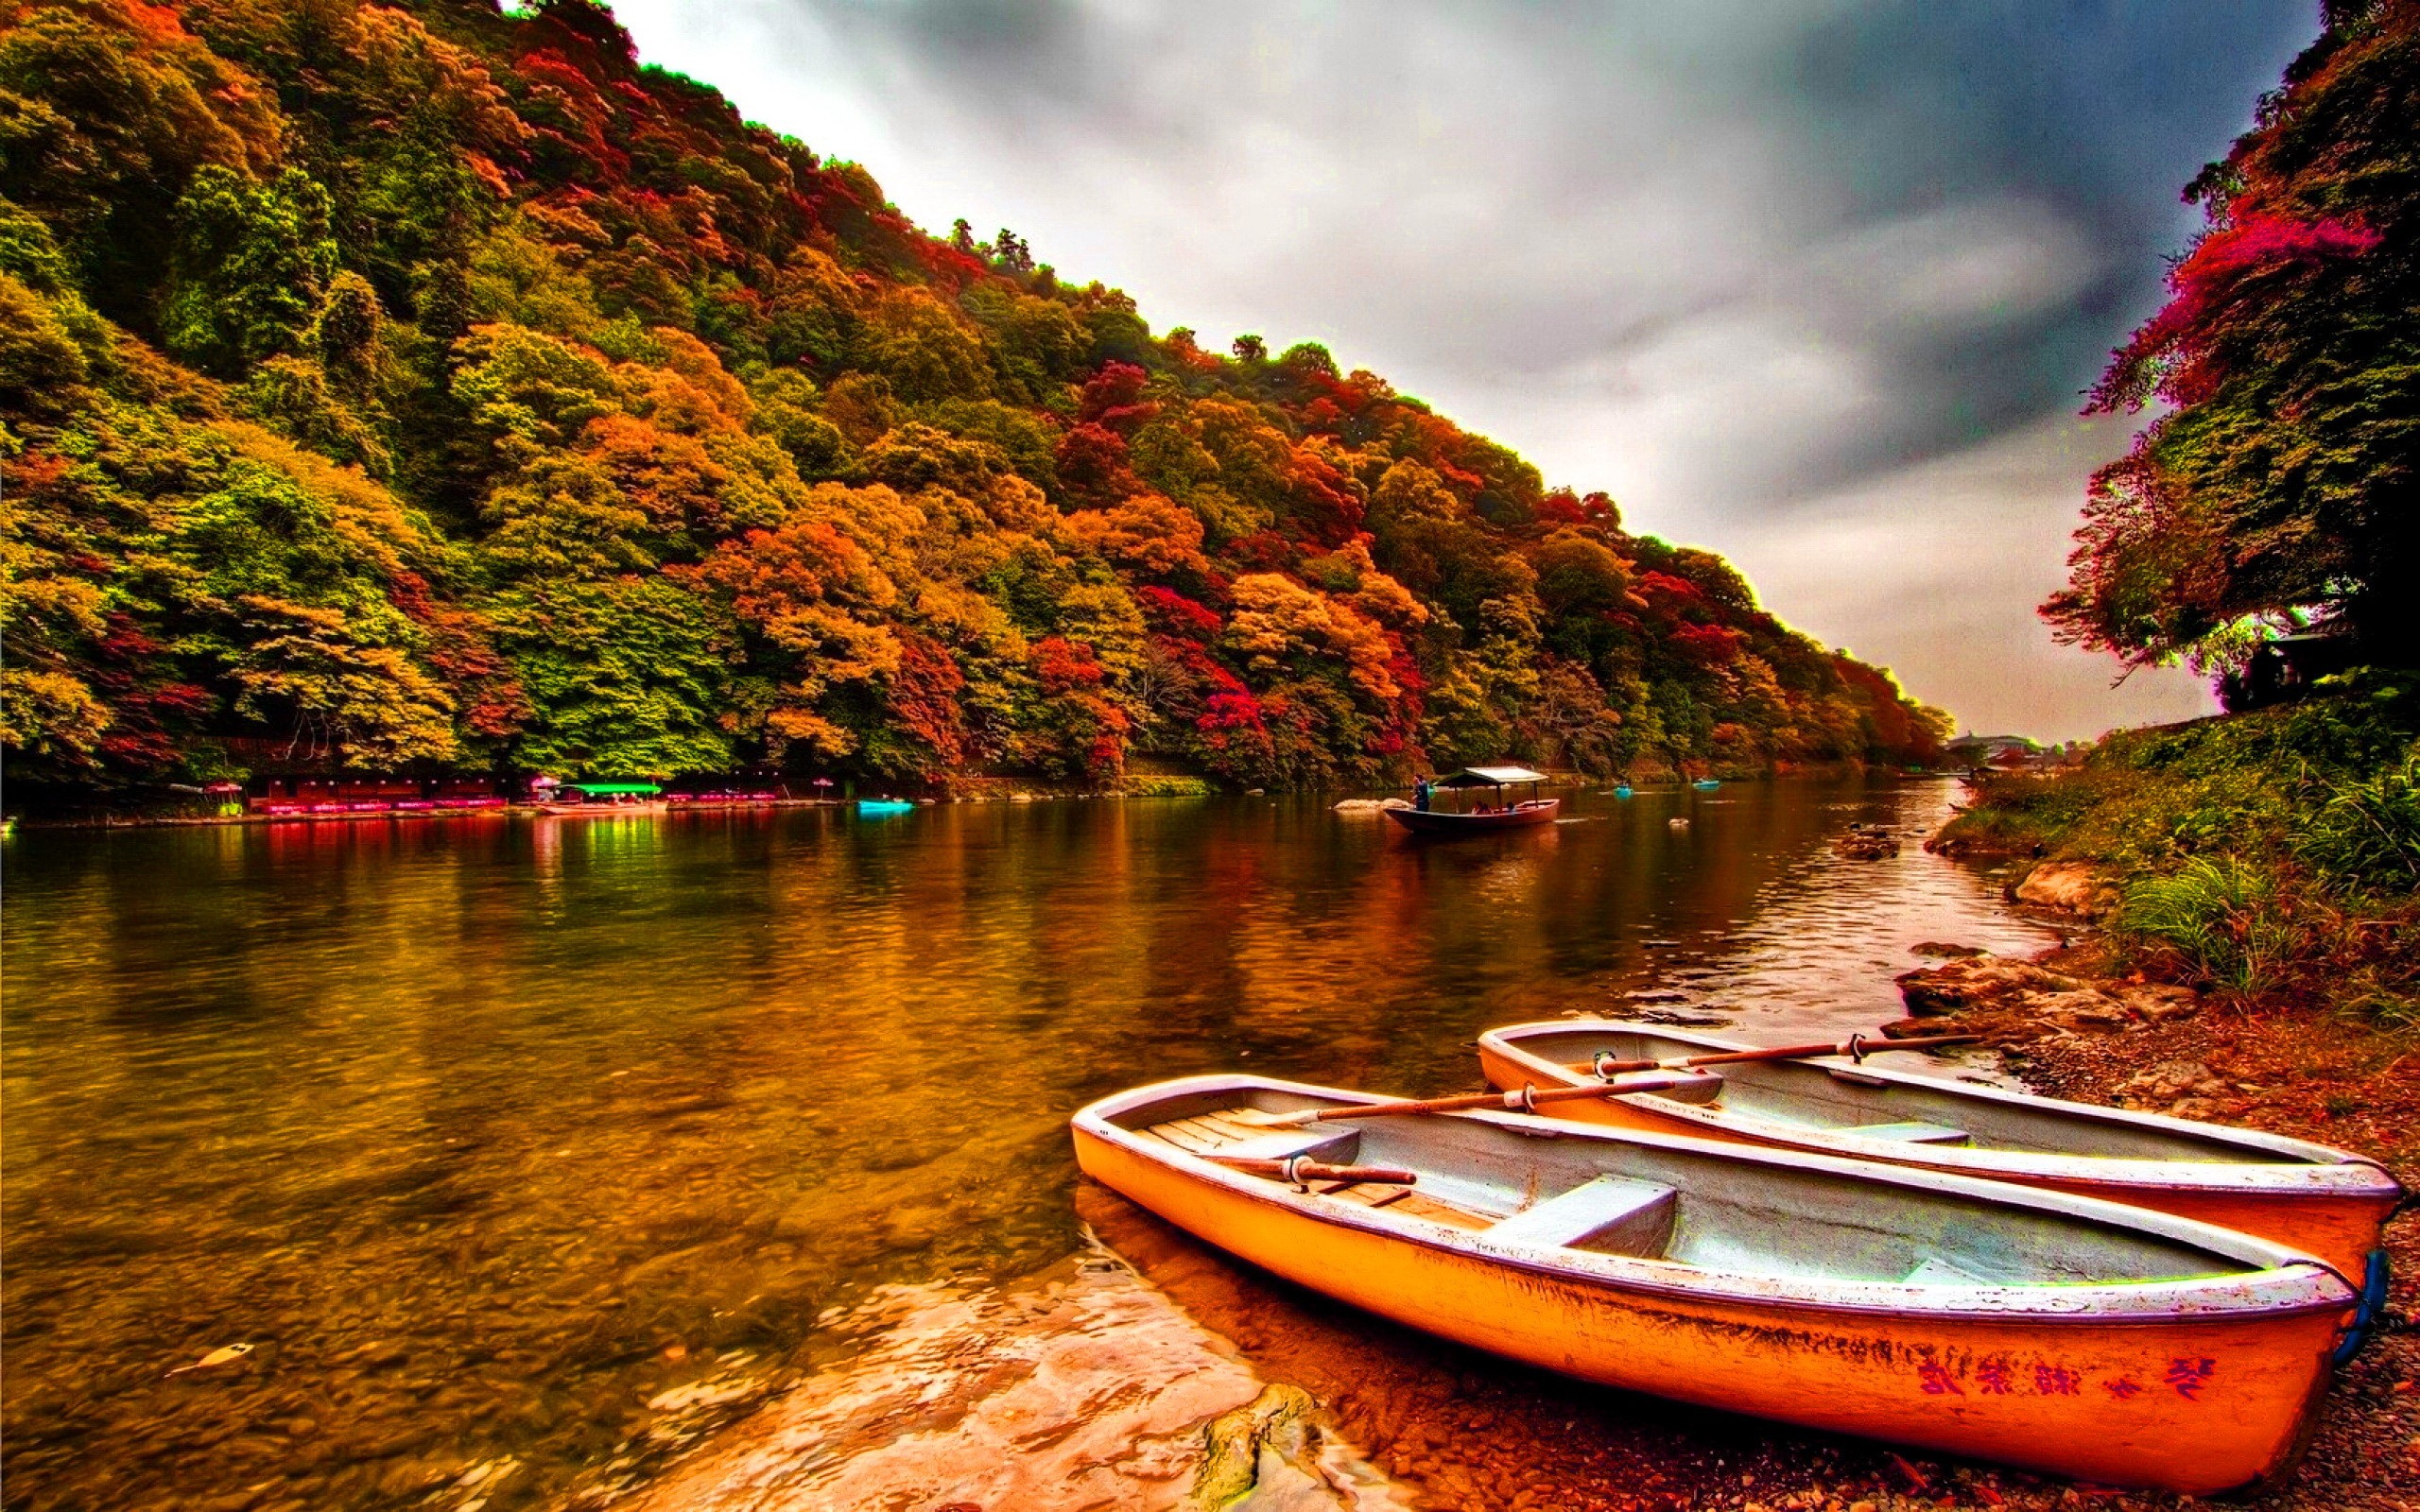 Boats on the riverbank wallpaper. PC